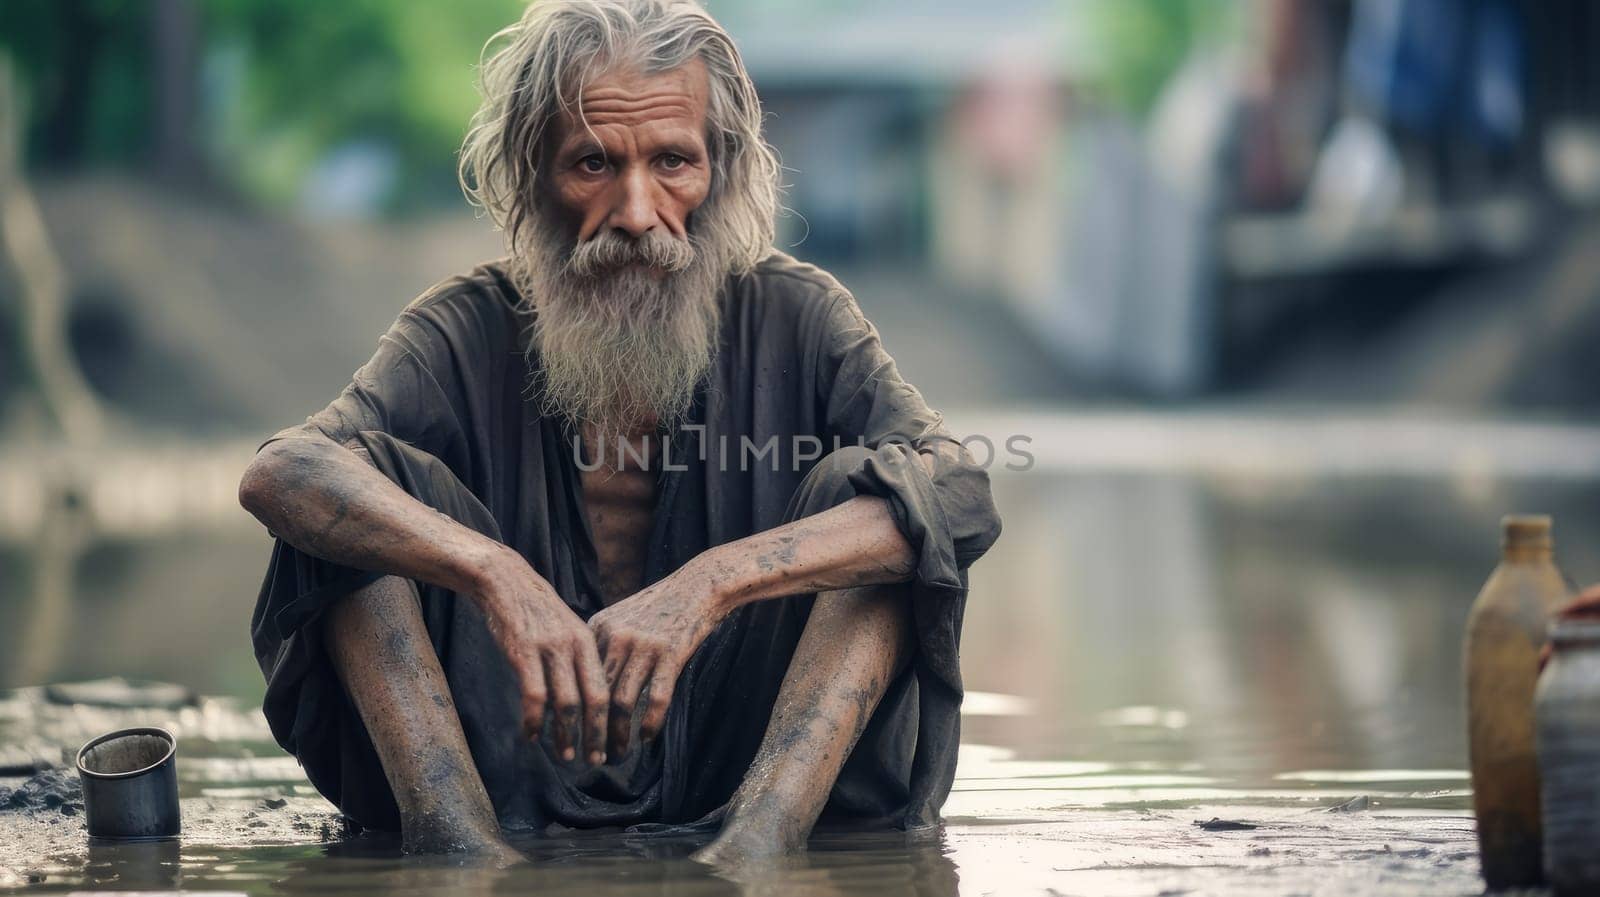 Poor, beggar, hungry dirty old elderly man begging for alms. Water shortage on Earth due to global warming, drought, famine. Climate change, crisis environment, water crisis. Saving natural resources, planet suffers